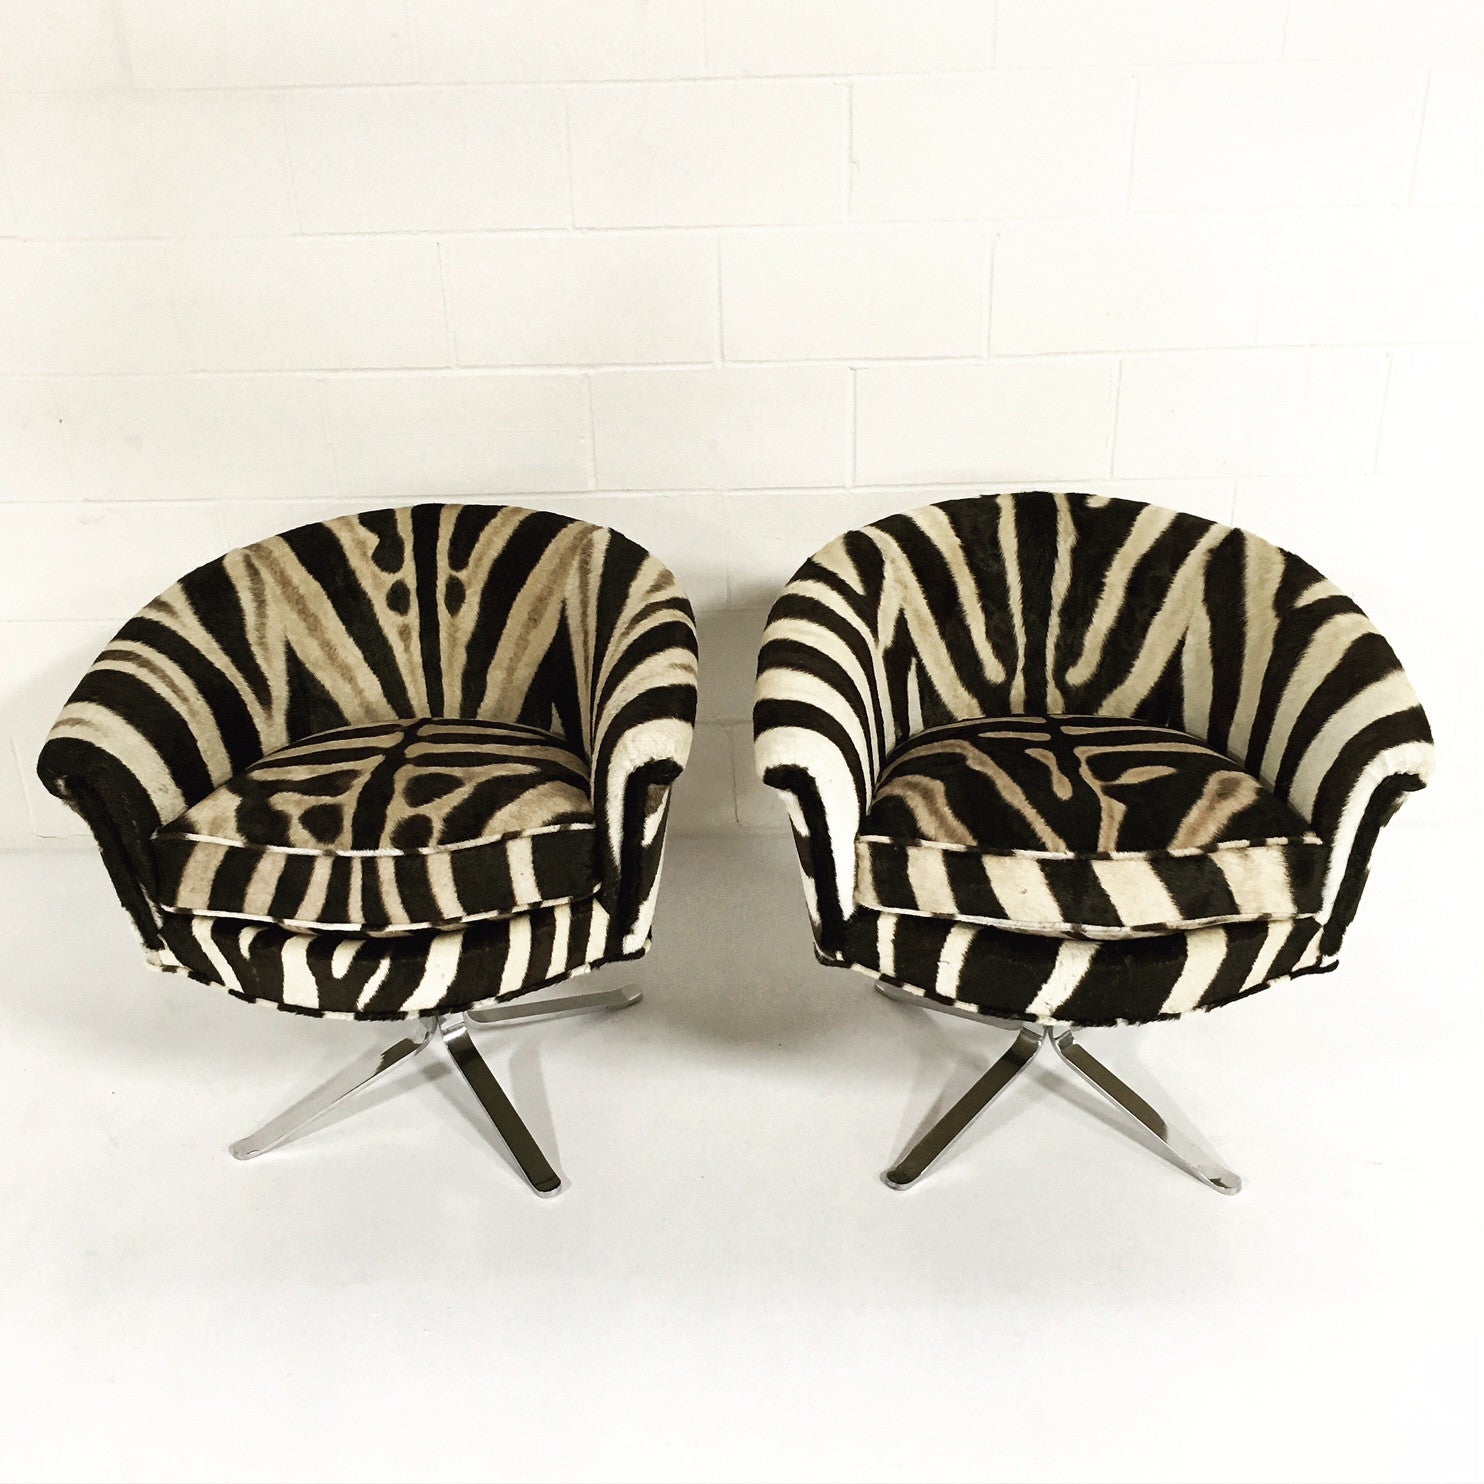 Swivel Chairs by Nicos Zographos - FORSYTH